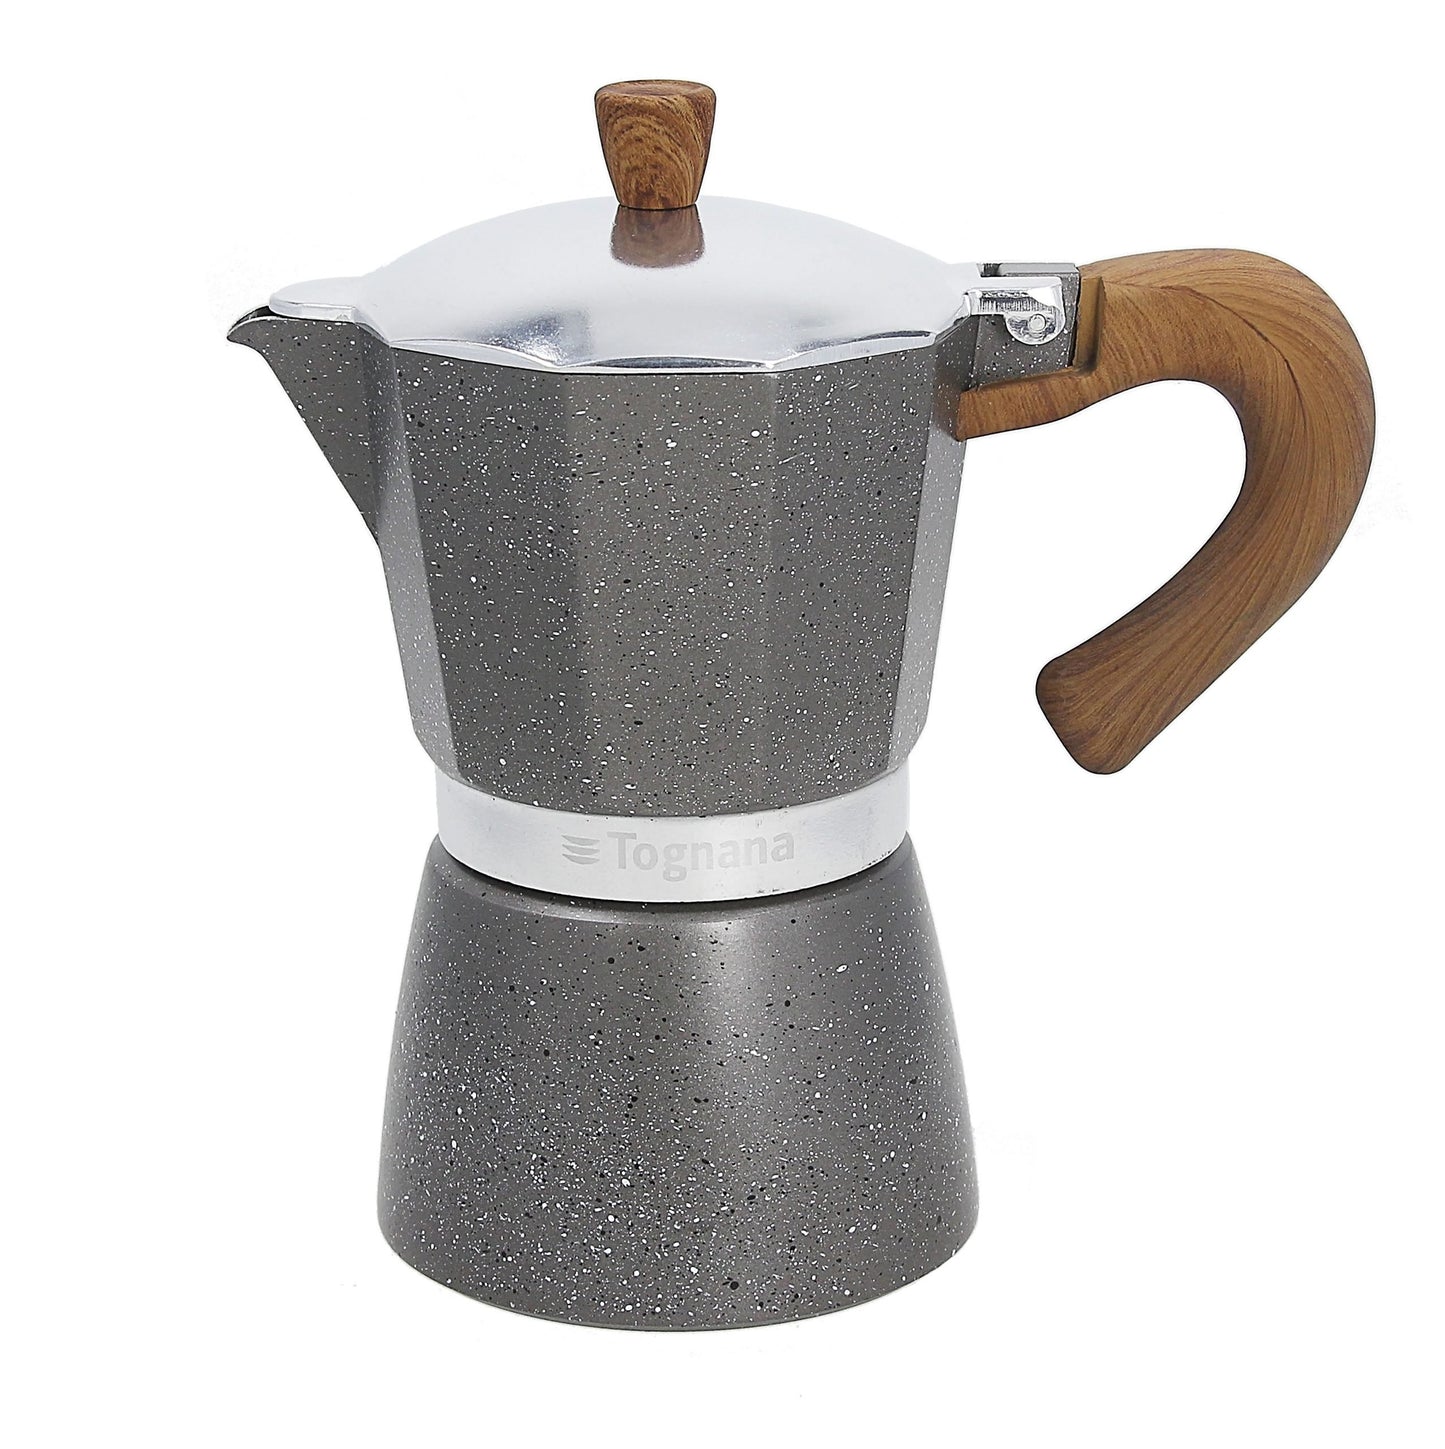 Tognana stone and wood coffee maker